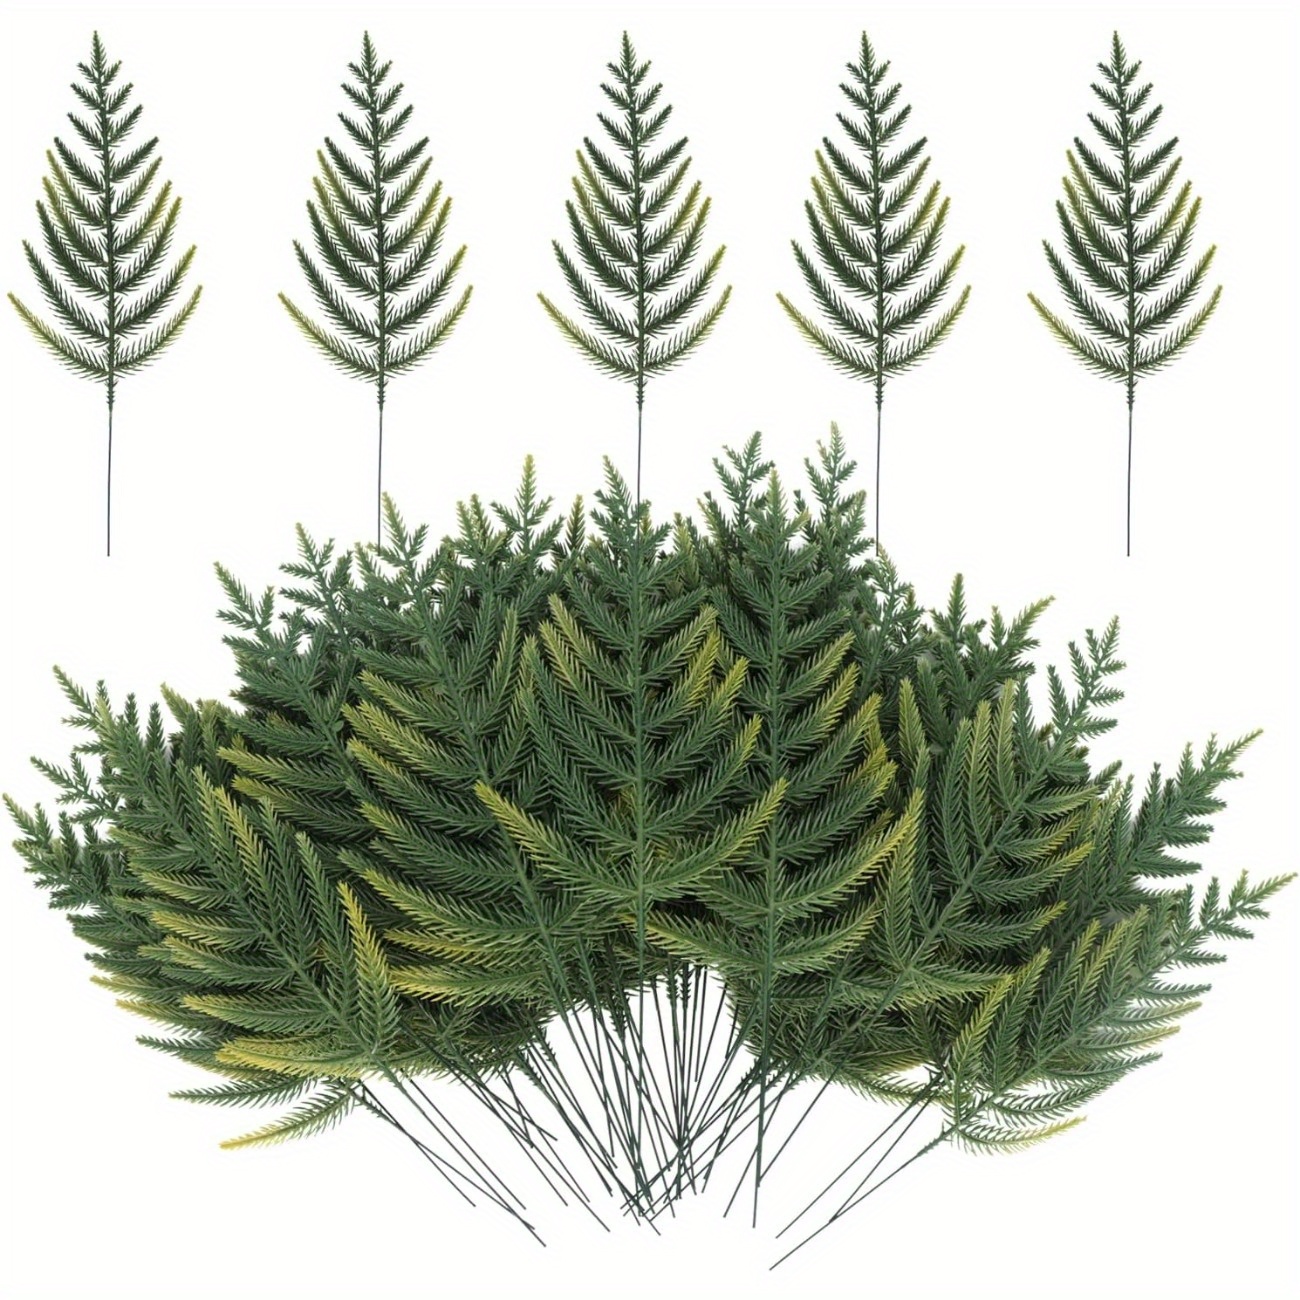 50pcs Christmas Pine Needles Artificial Pine Branches Green Leaves